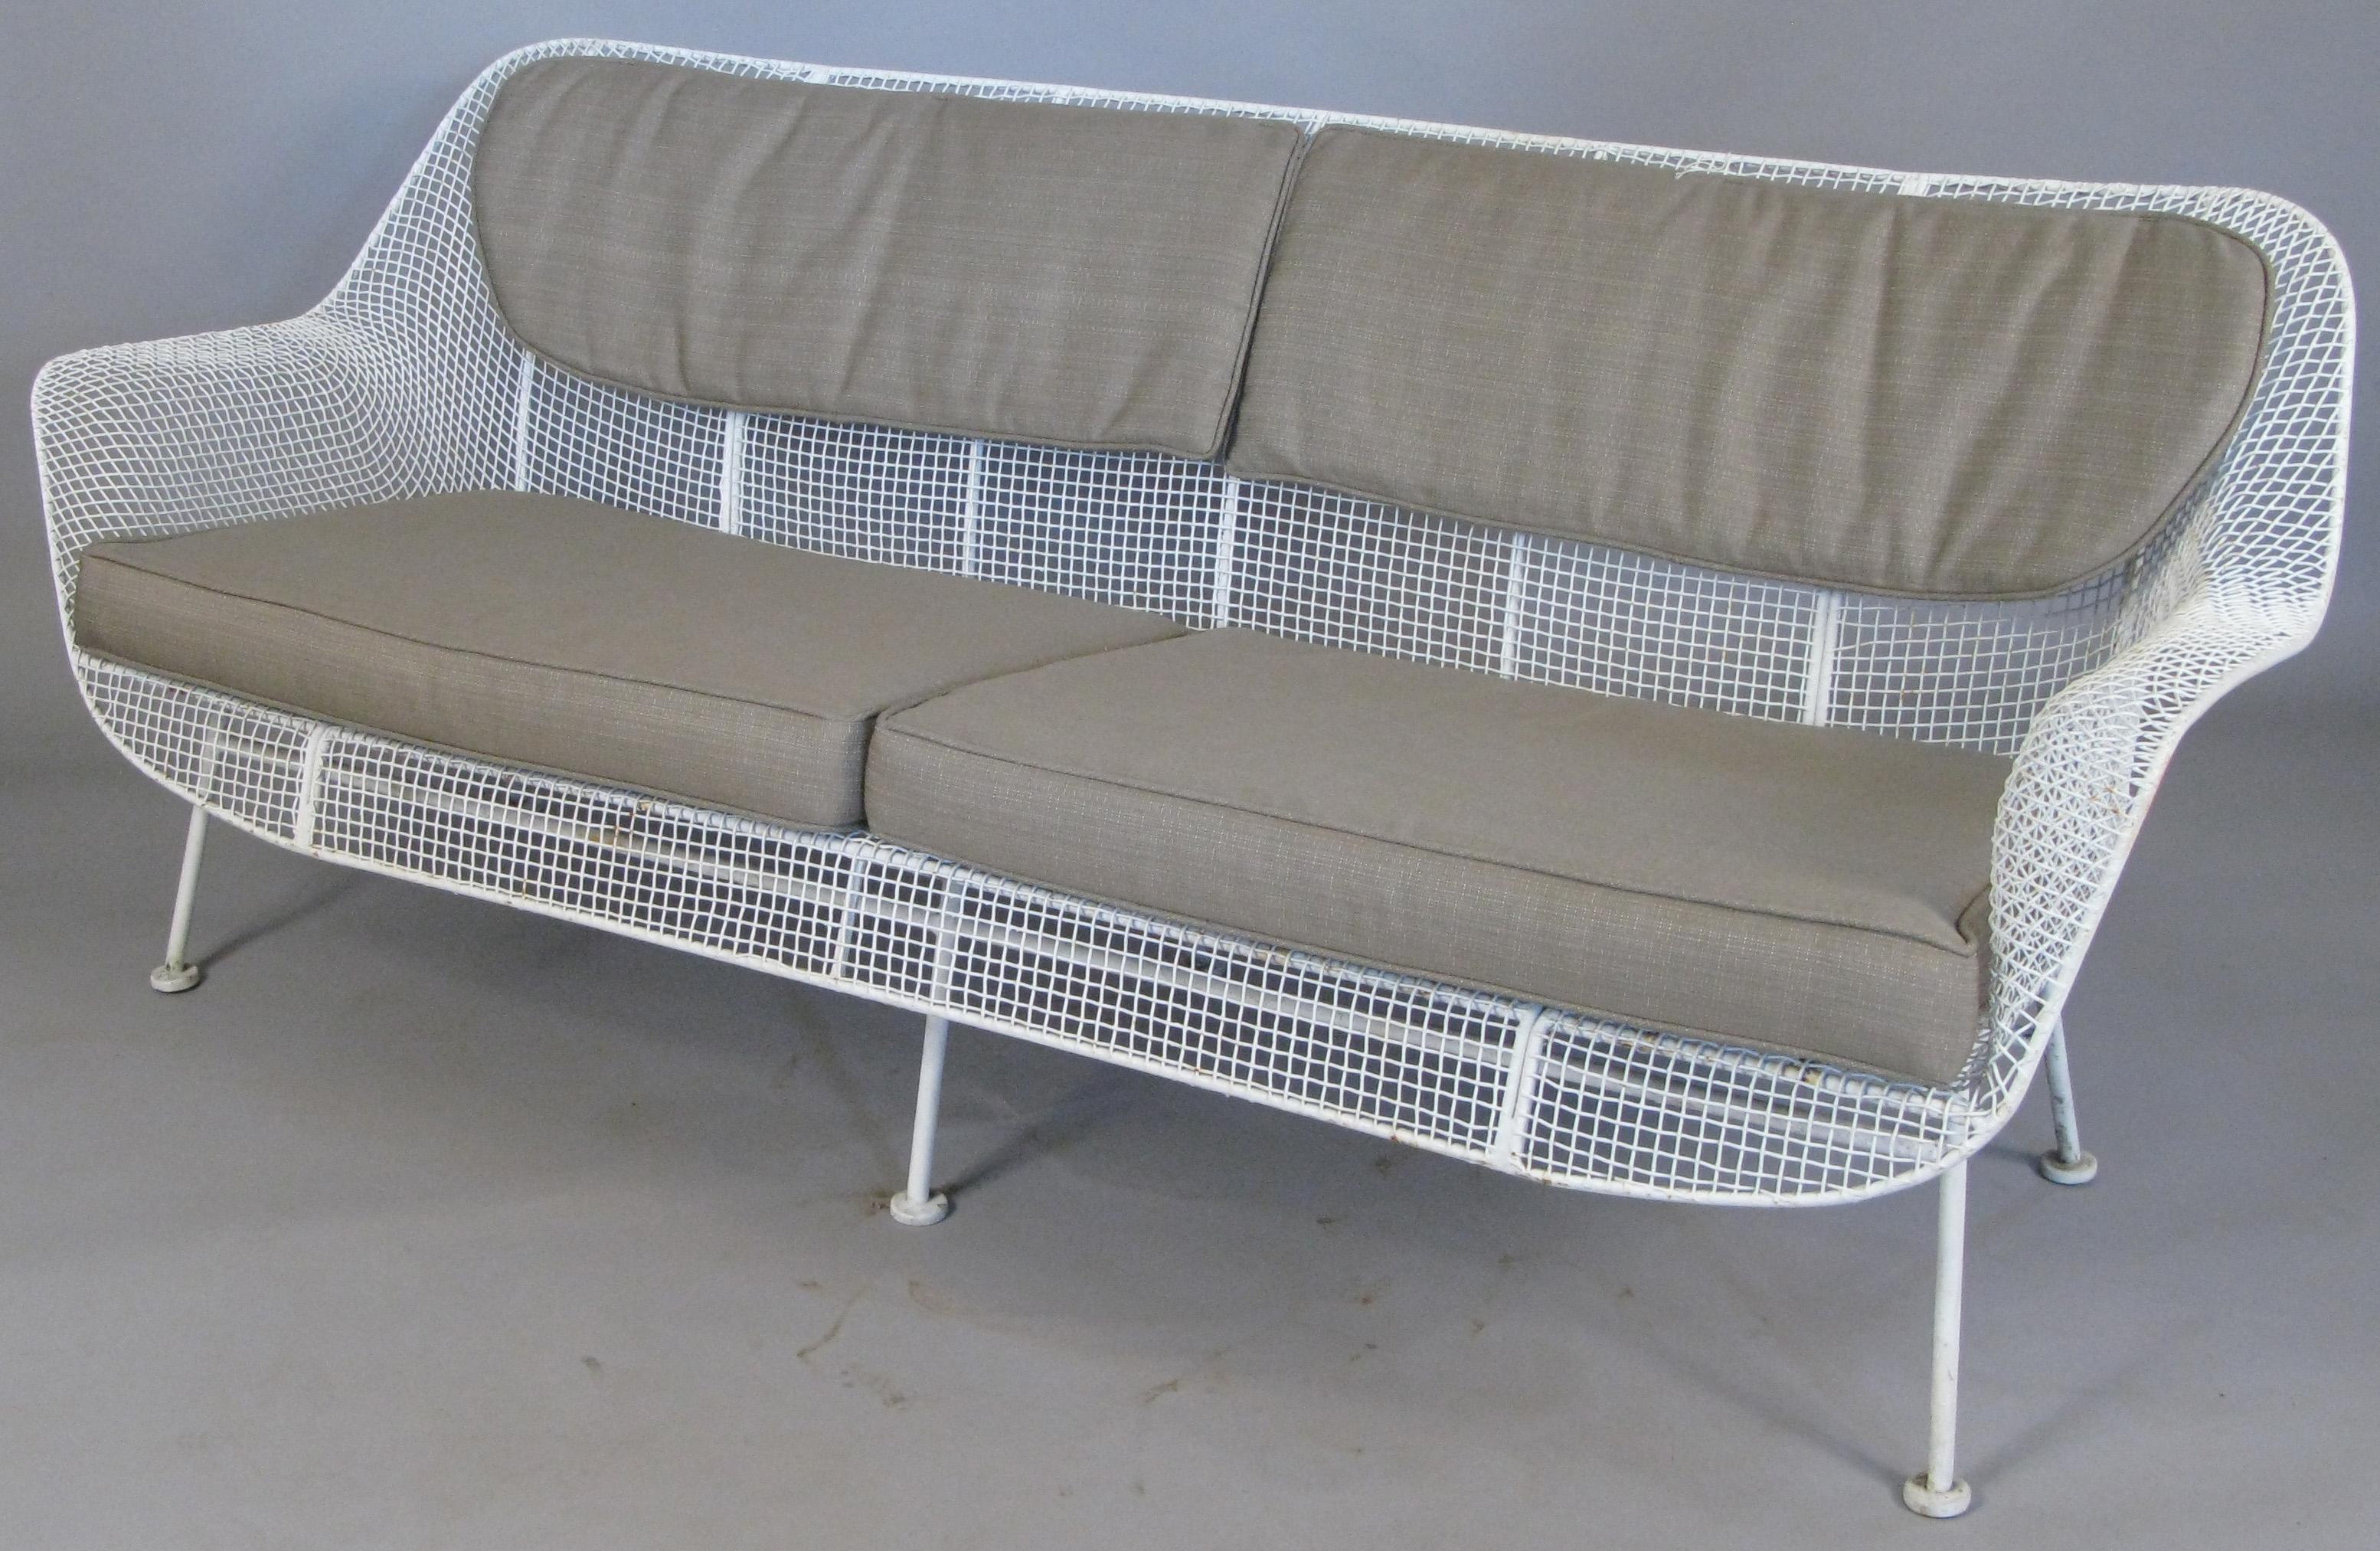 A rare example of Russell Woodard's iconic sculptura long sofa, four-seat, in wrought iron and woven steel mesh. Beautiful proportions in this wide and deep lounge sofa make this very comfortable and stylish. finished in its original white. the